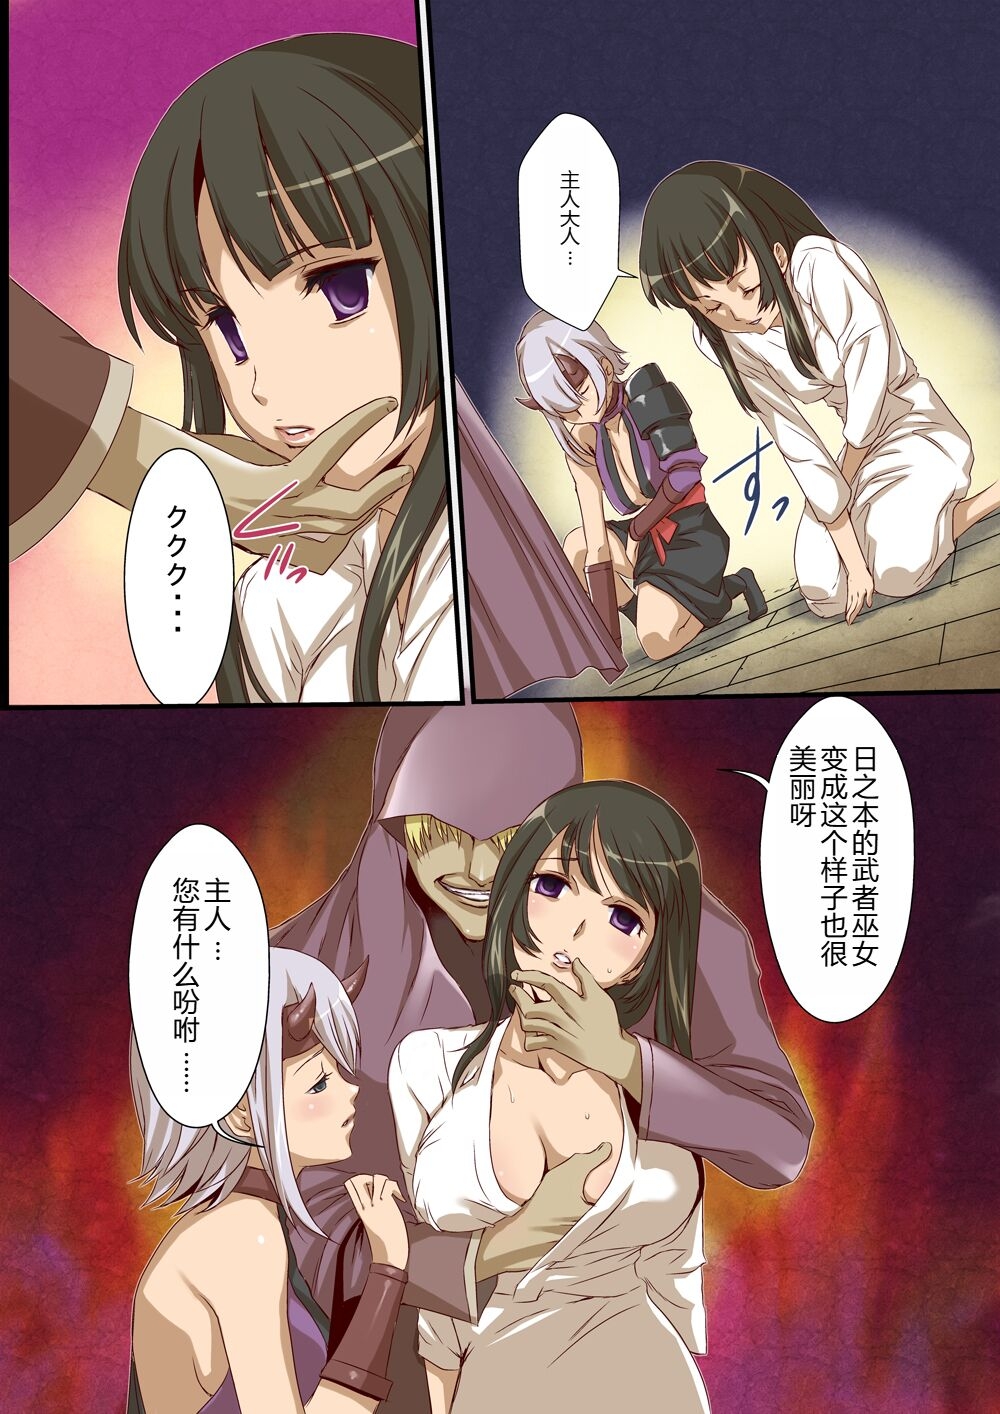 [Utsuro na Hitomi] Queen's *lade Mind-control Manga (Queen's Blade) [chinese] [lalala1234个人机翻汉化] 7